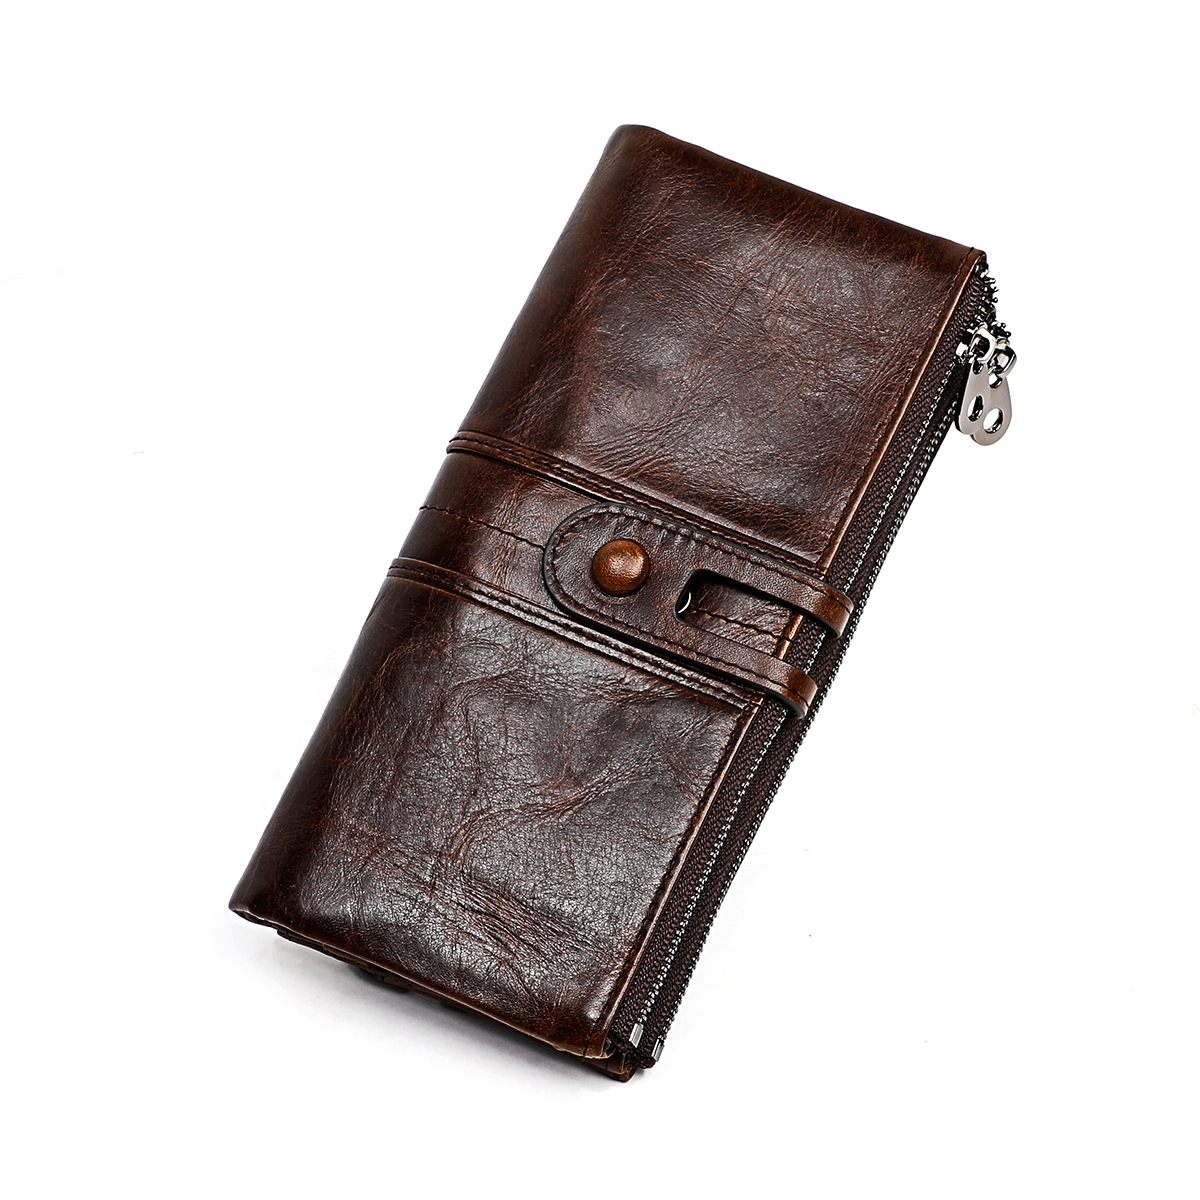 Contacts Men RFID Genuine Leather Clutch Bag Wallet Phone Holder